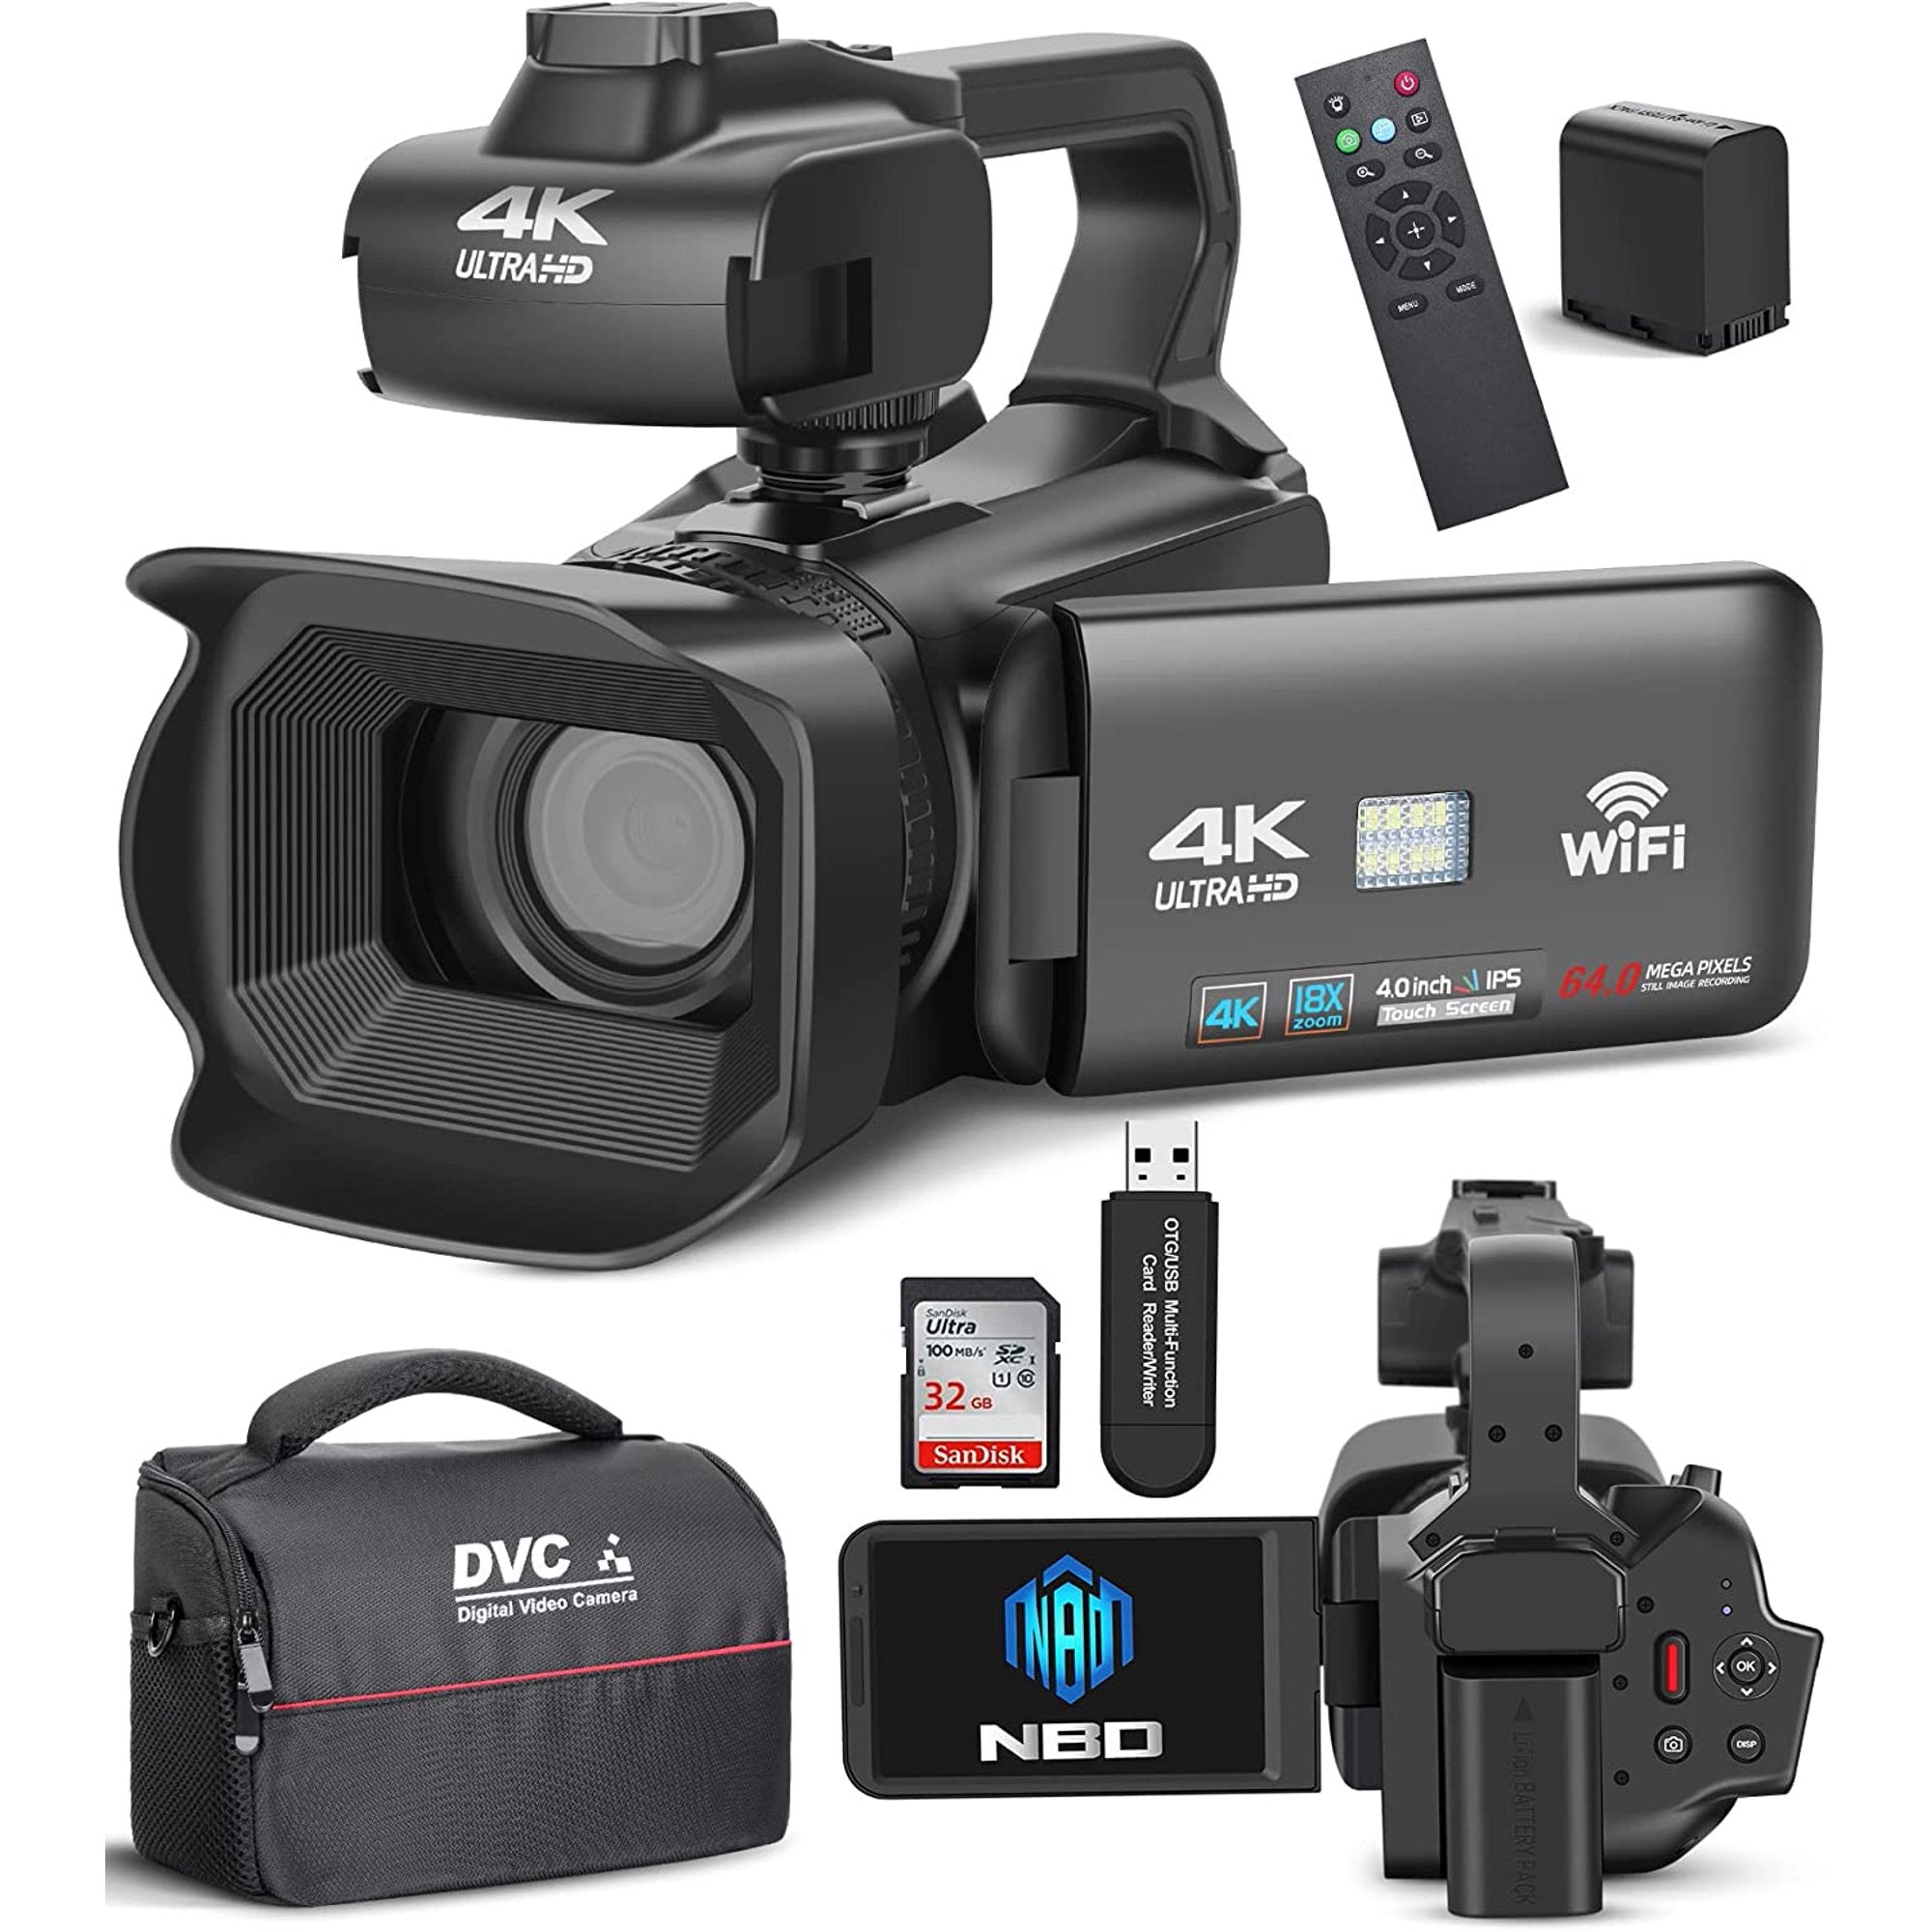 NBD 4K Video Camera - 64MP Camcorder with Manual Focus, 4.0" Touch Screen, WiFi, Remote Control